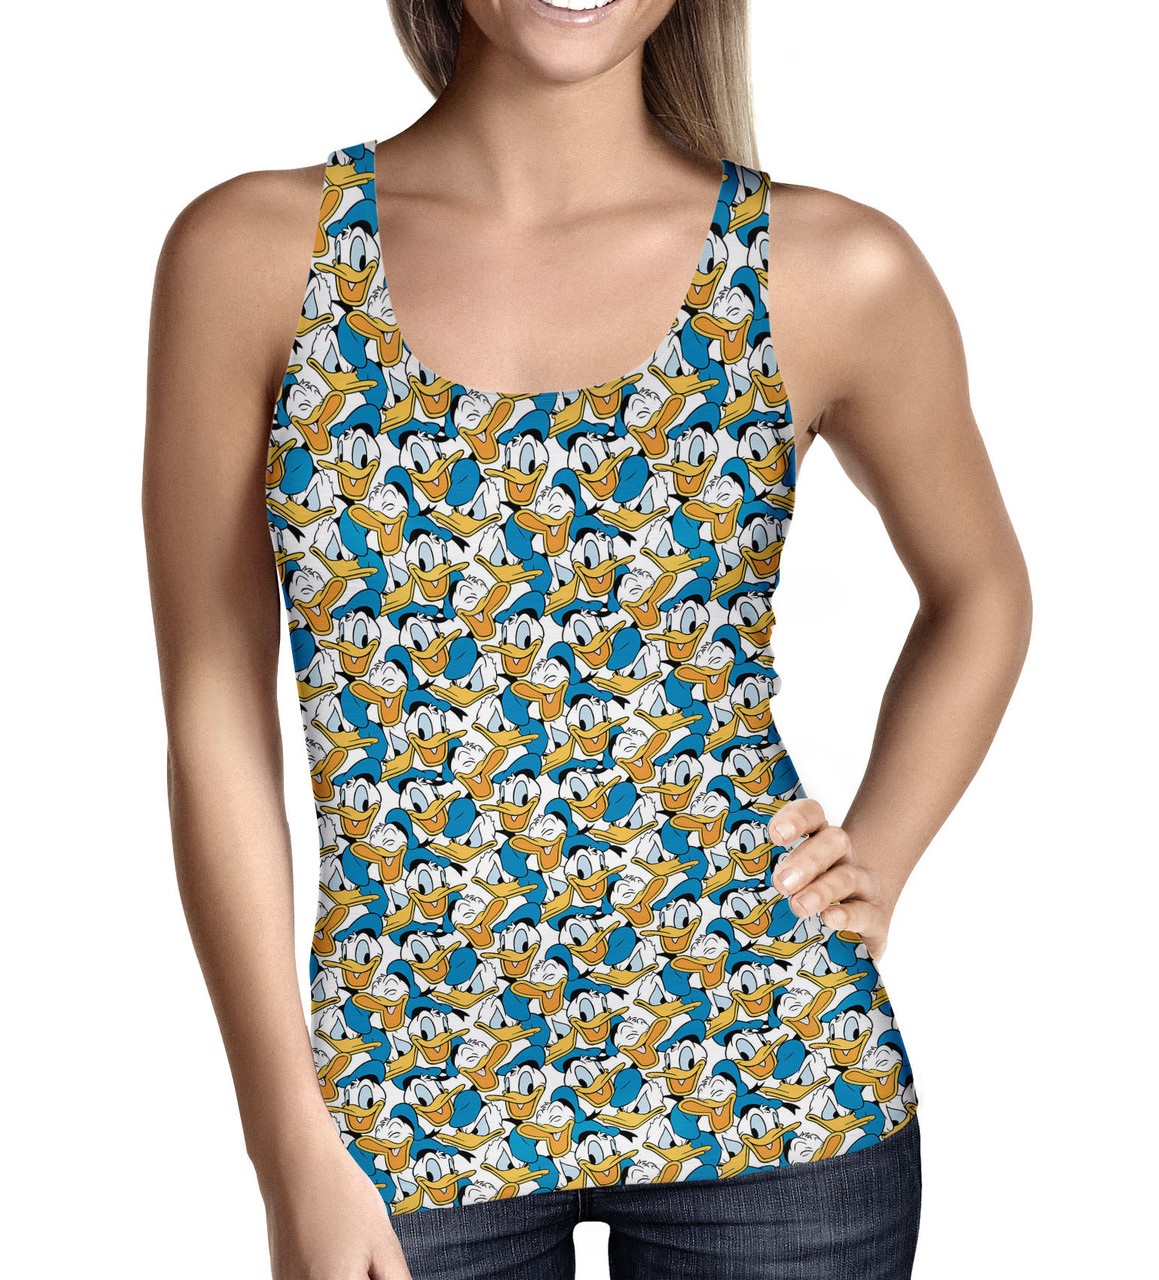 Women's Tank Top - Many Faces of Donald Duck